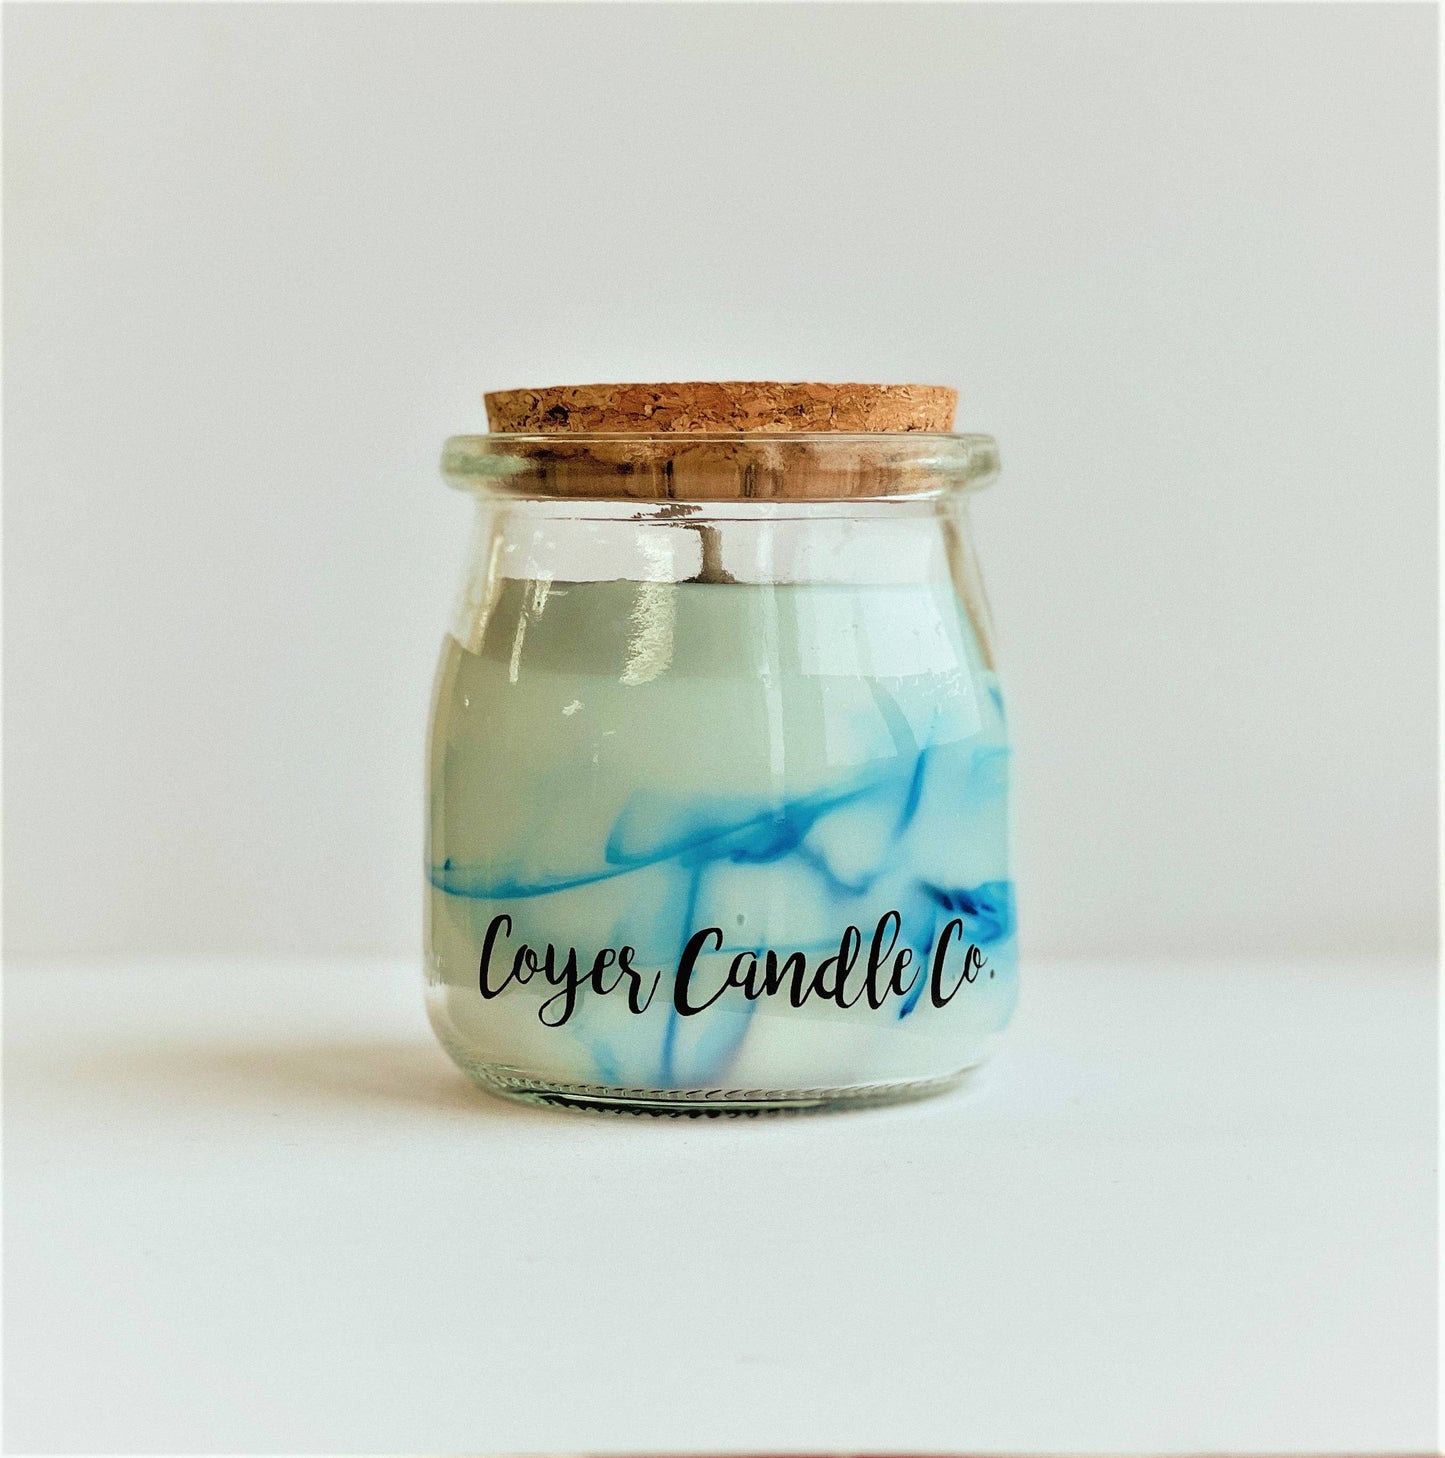 Coyer Candle Co. - 5 oz. Studio Jar Candle - Winter & Christmas Collection: Tropical State of Mind / Swirled Dye